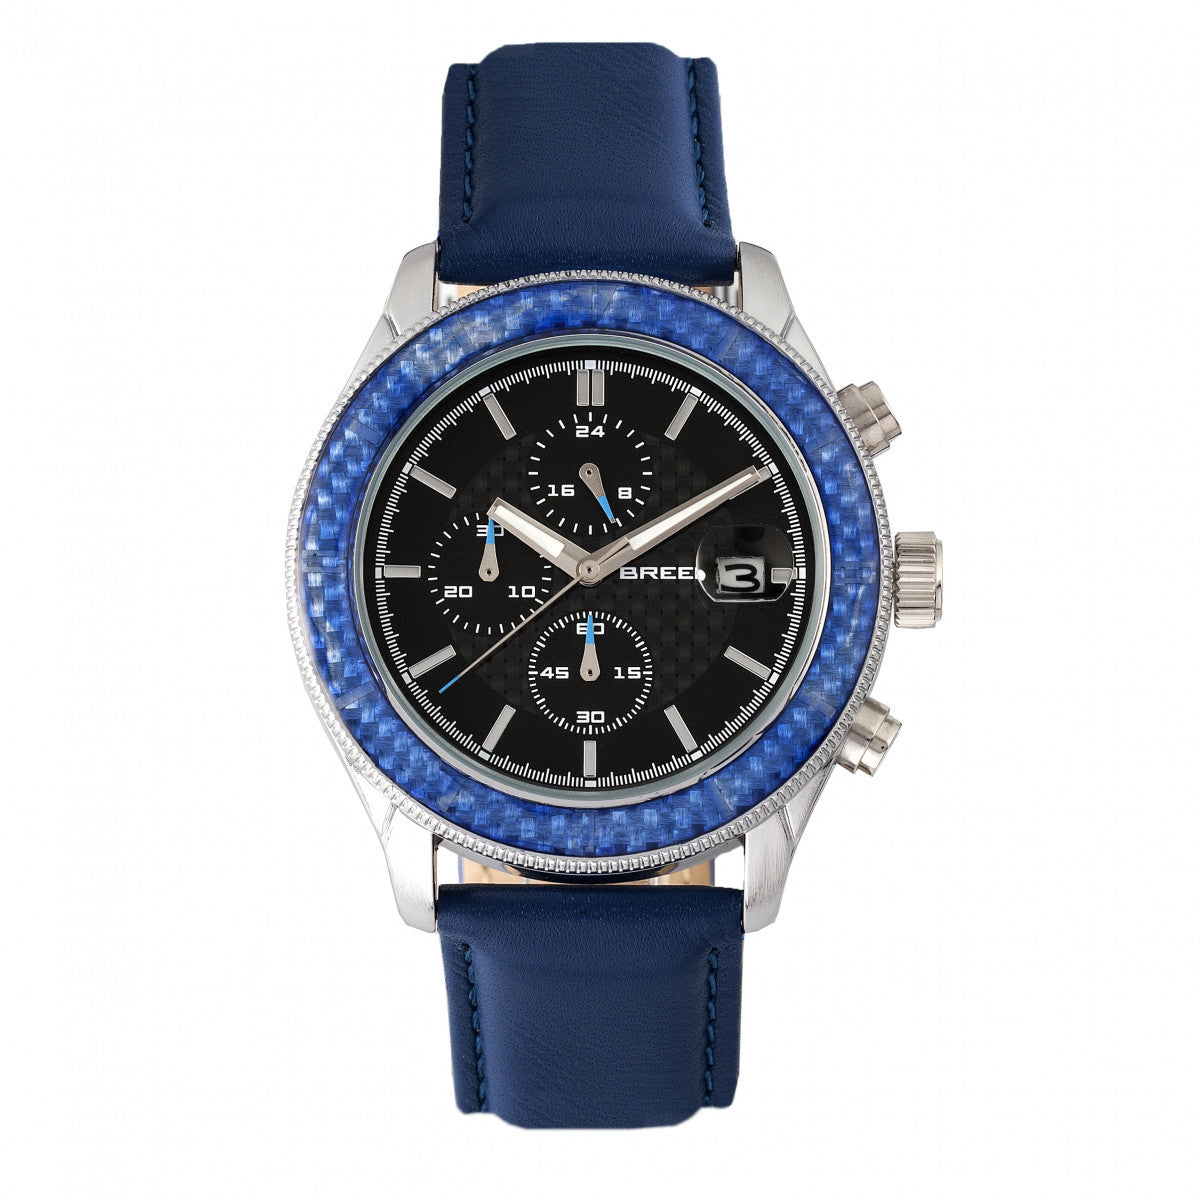 Breed Maverick Chronograph Leather-Band Watch w/Date - Silver/Blue - BRD7504